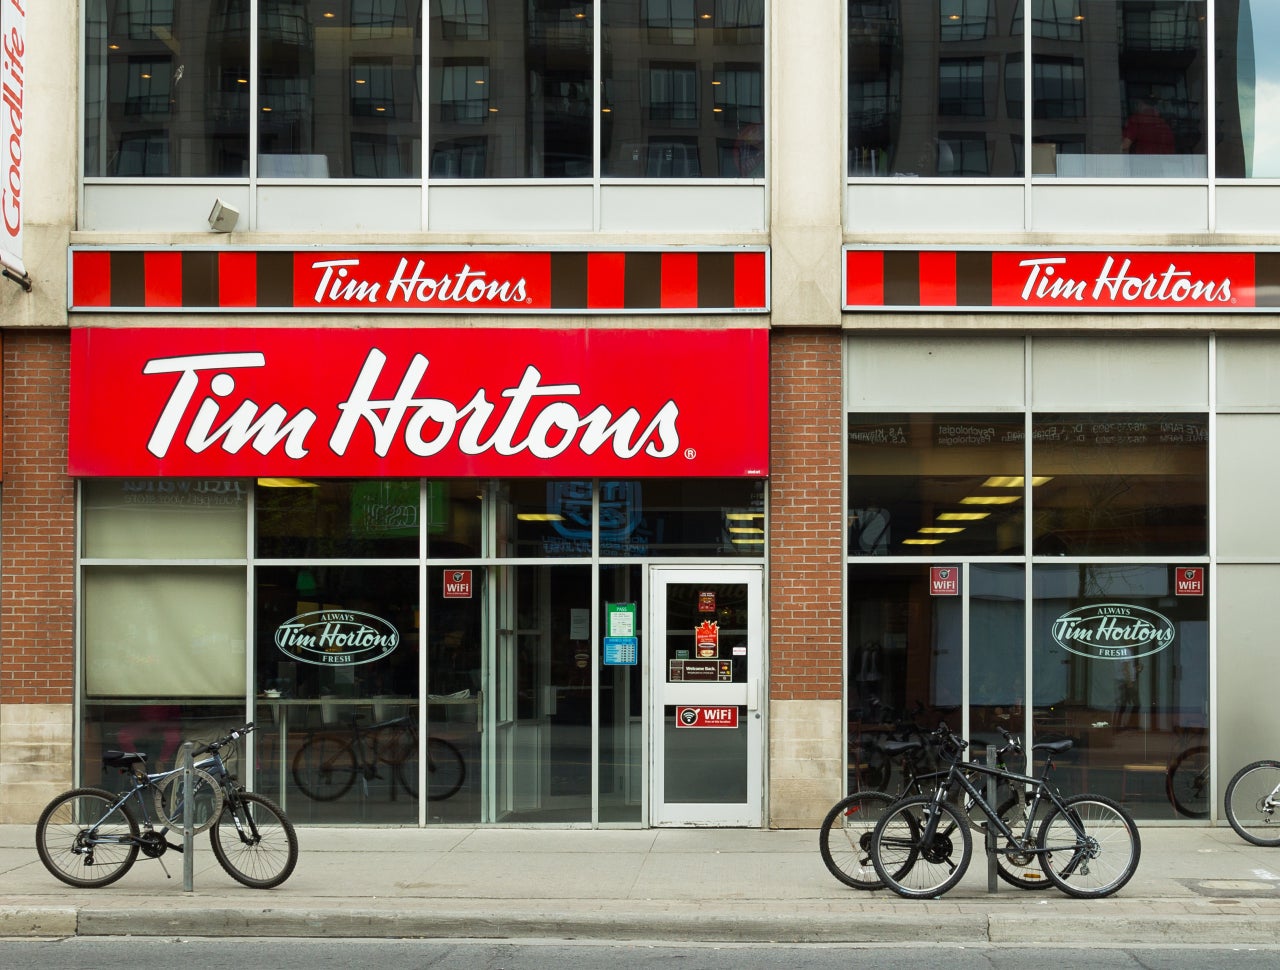 Tim Hortons China raises funds to accelerate growth